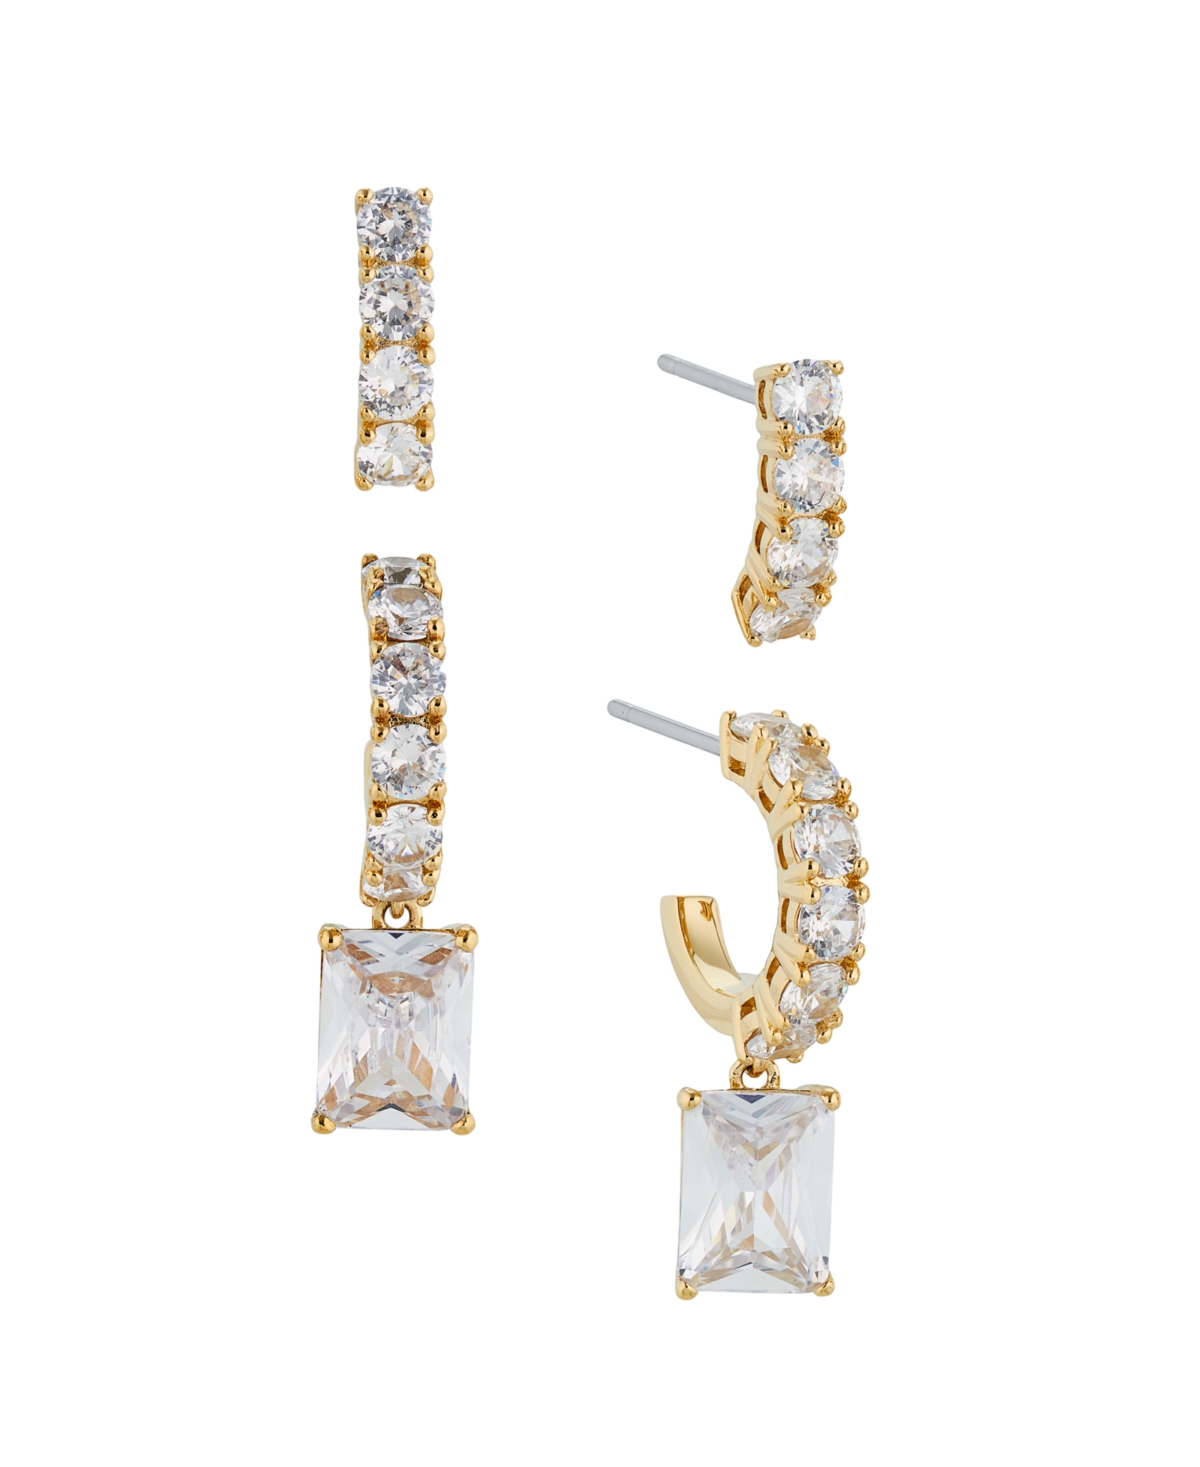 Eliot Danori Cubic Zirconia Studs and Extra Small C Hoop Set Two Pair of Earrings (4 Pieces)